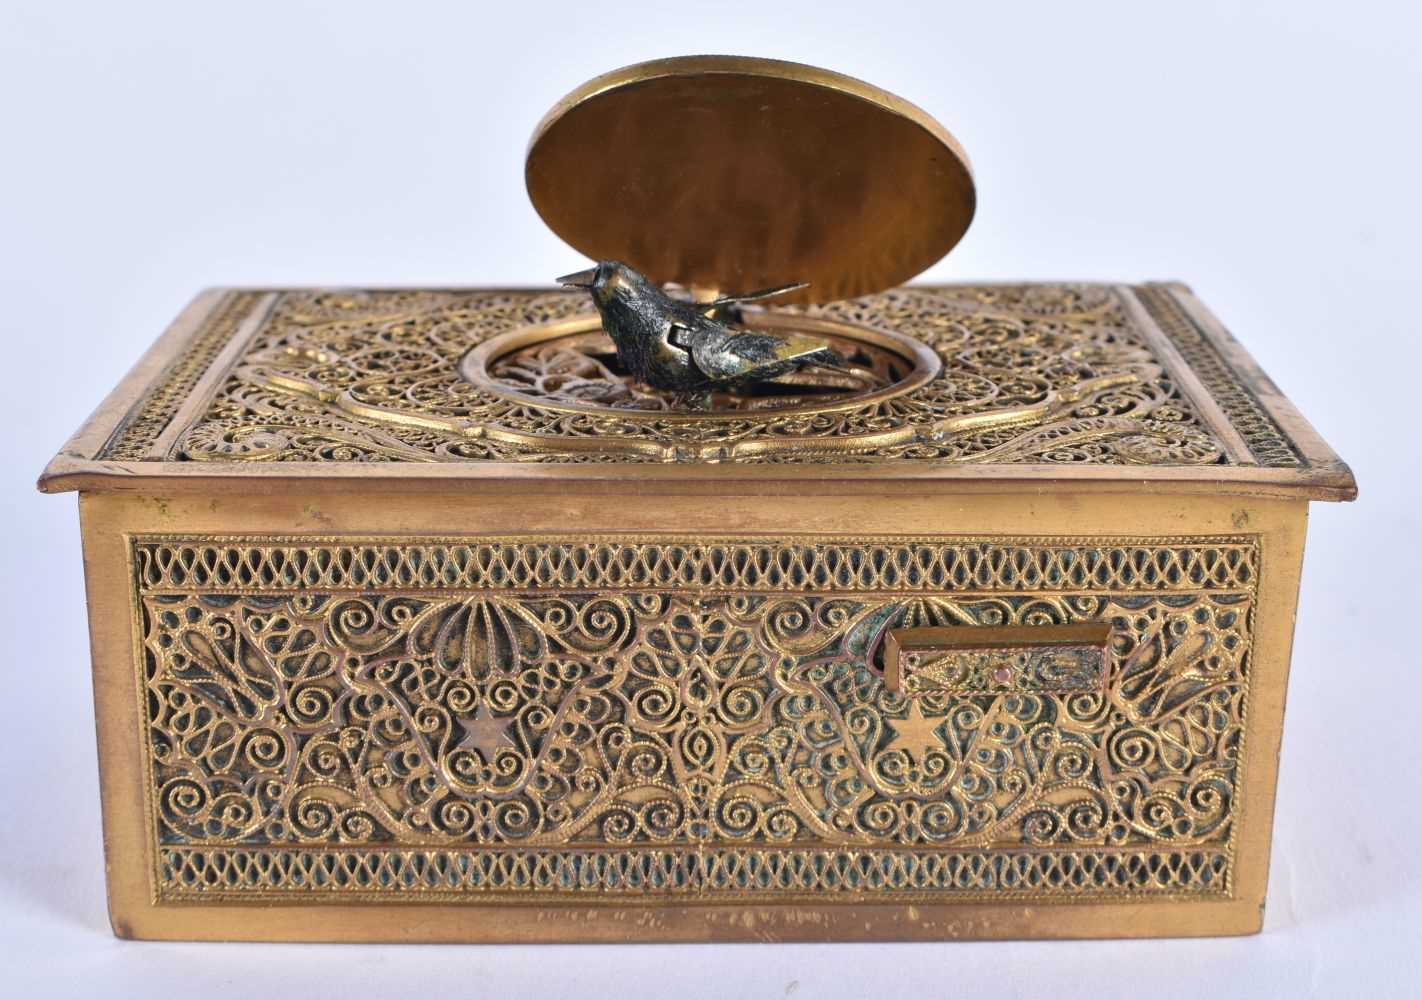 AN ANTIQUE SWISS BRONZE AUTOMATON SINGING BIRD BOX decorated with filigree foliage and vines. 10 - Image 2 of 5